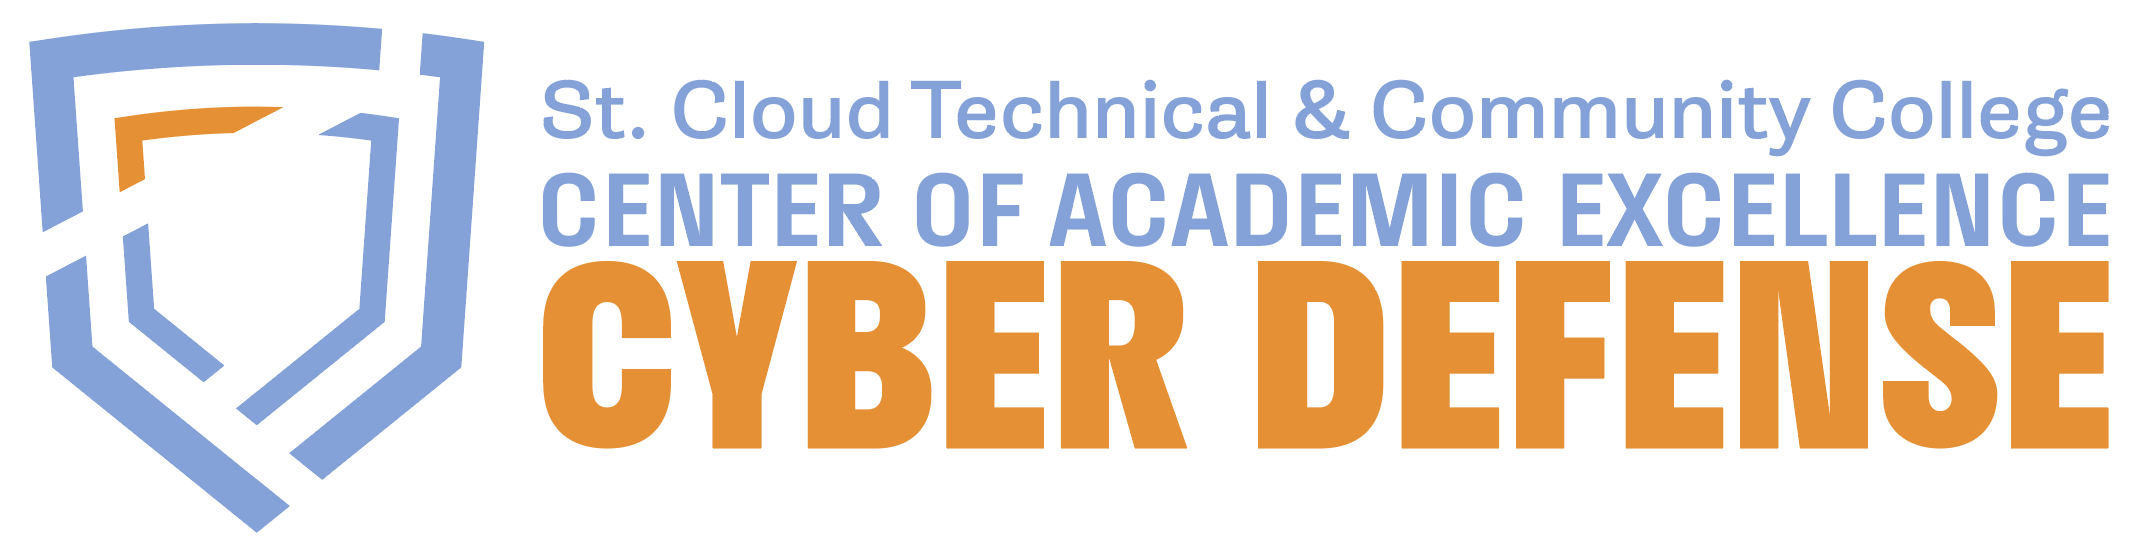 SCTCC Center of Academic Excellence Cyber Defense